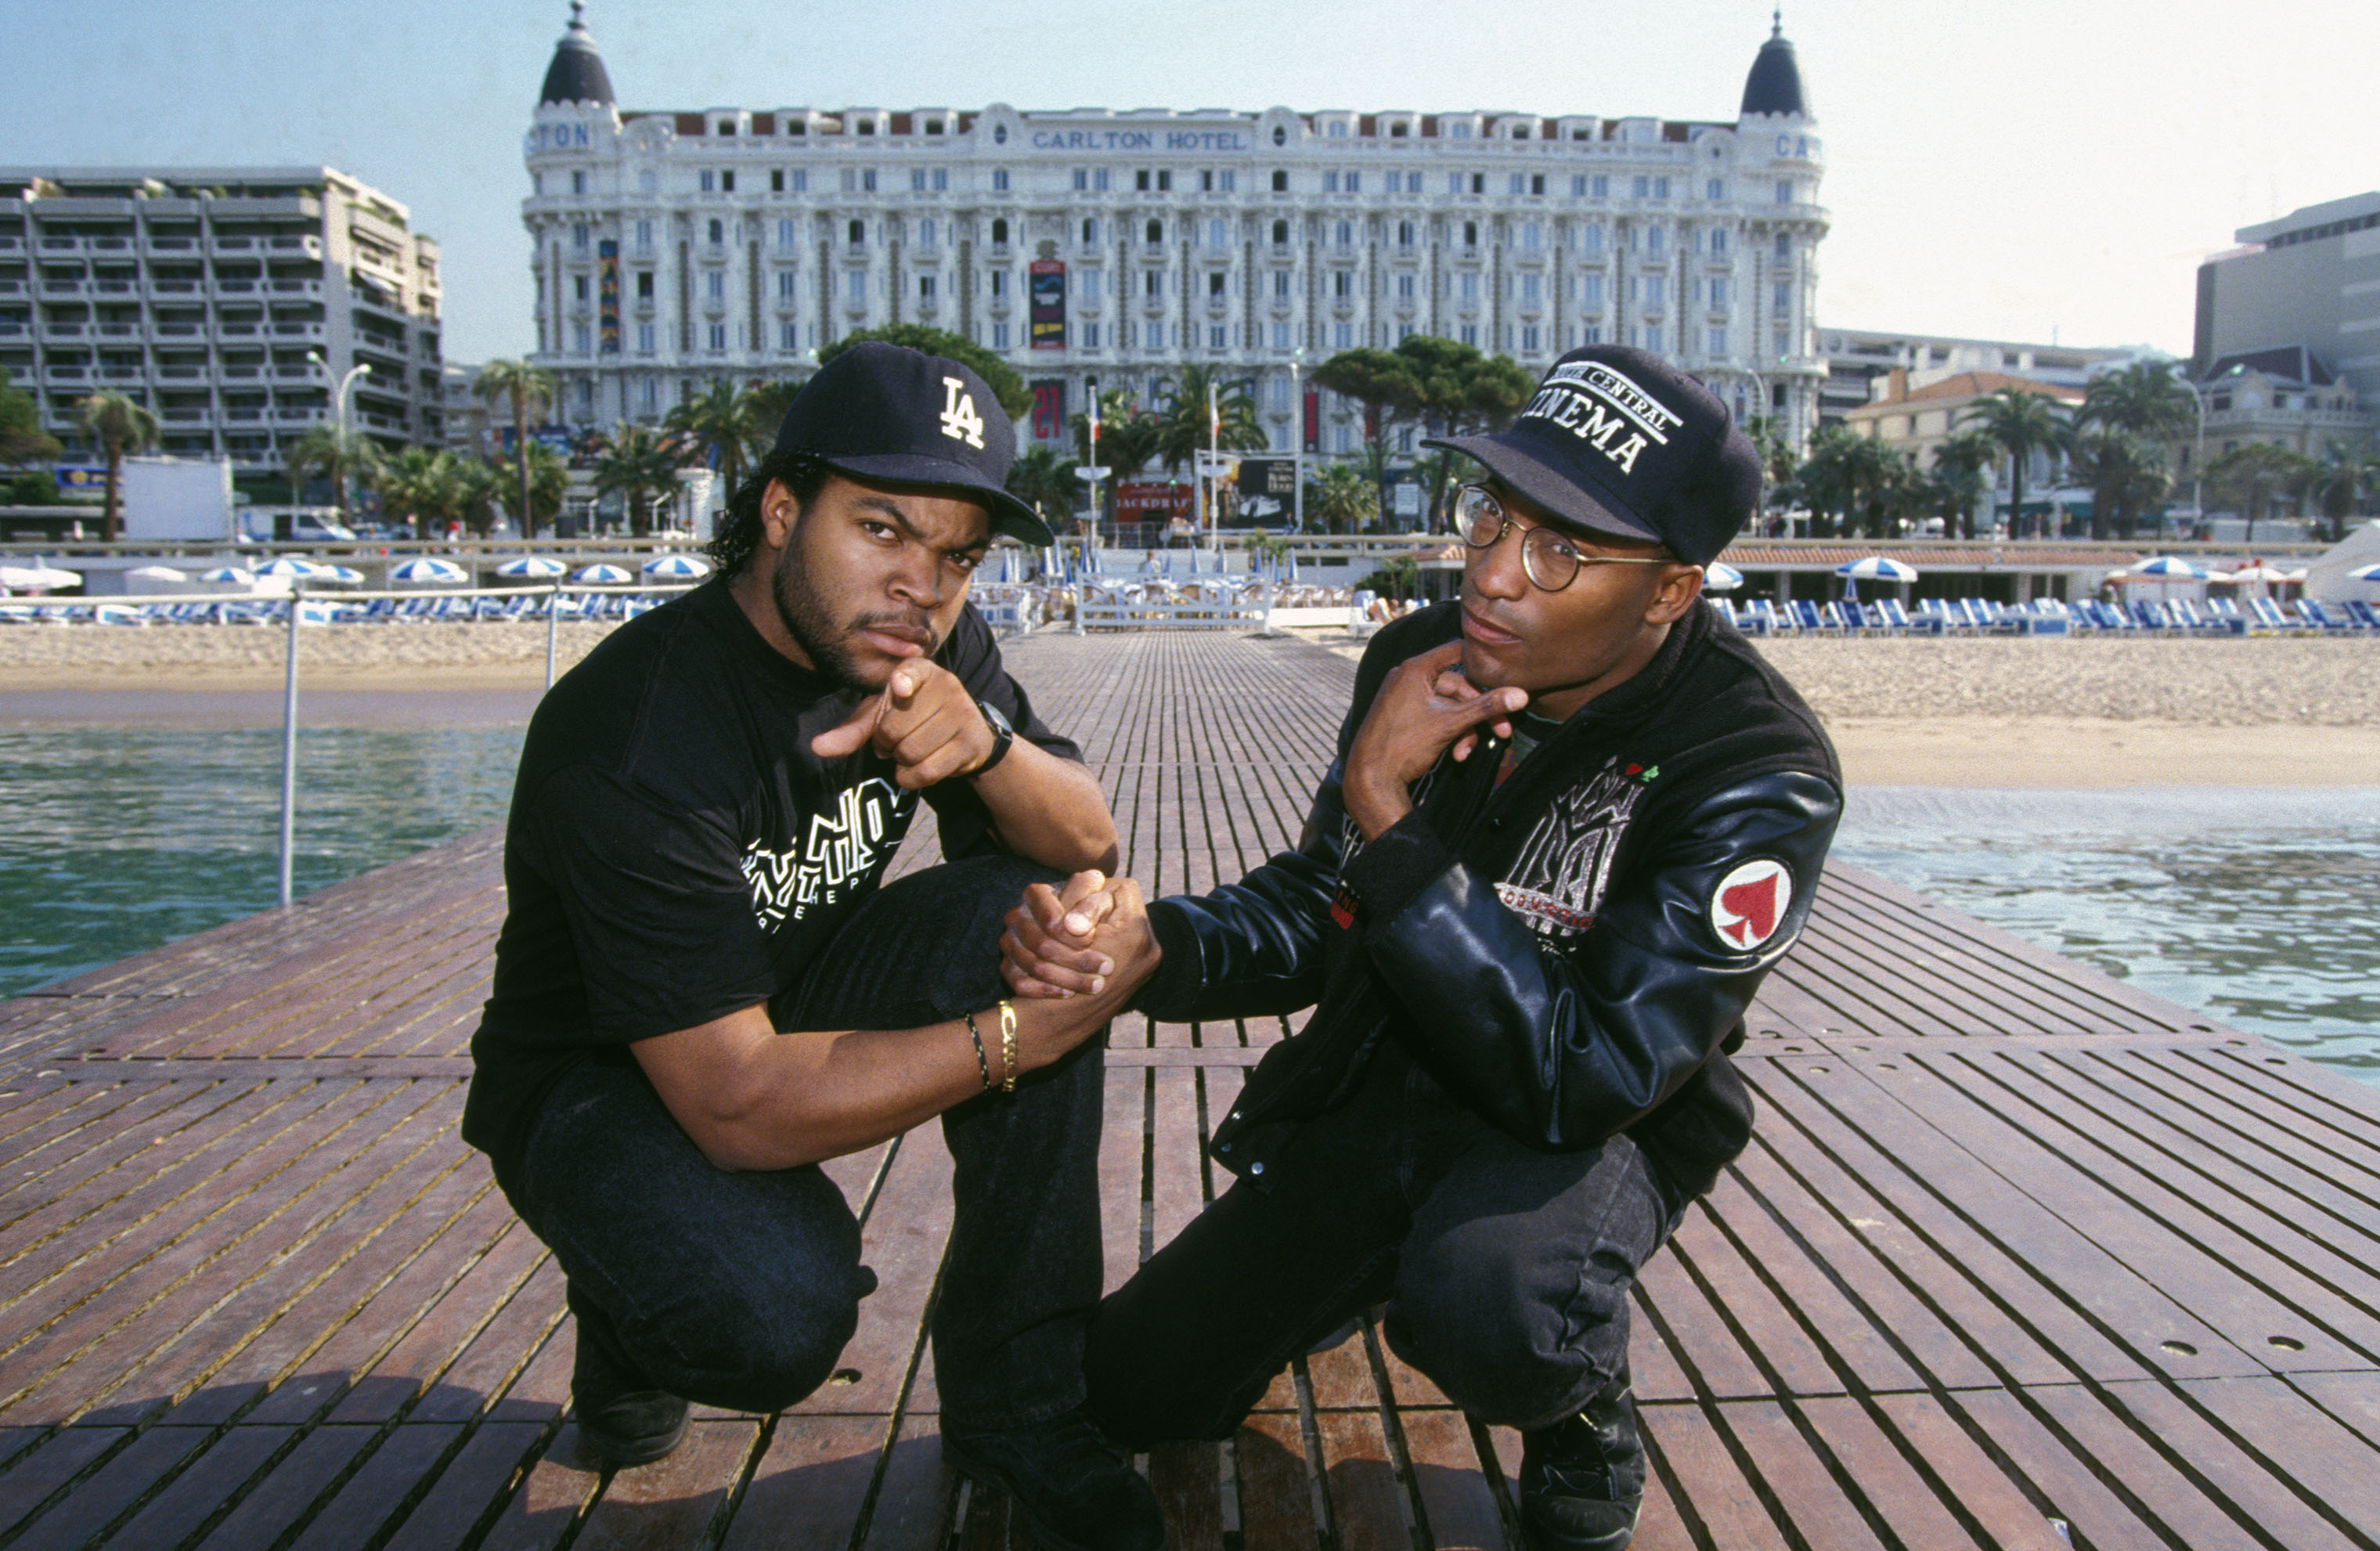 Actor and rapper Ice Cube with John Singleton, director of 'Boyz N the Hood' at Cannes in May 1991 in France. (Pool ARNAL/GARCIA/PICOT/Gamma-Rapho via Getty Images)